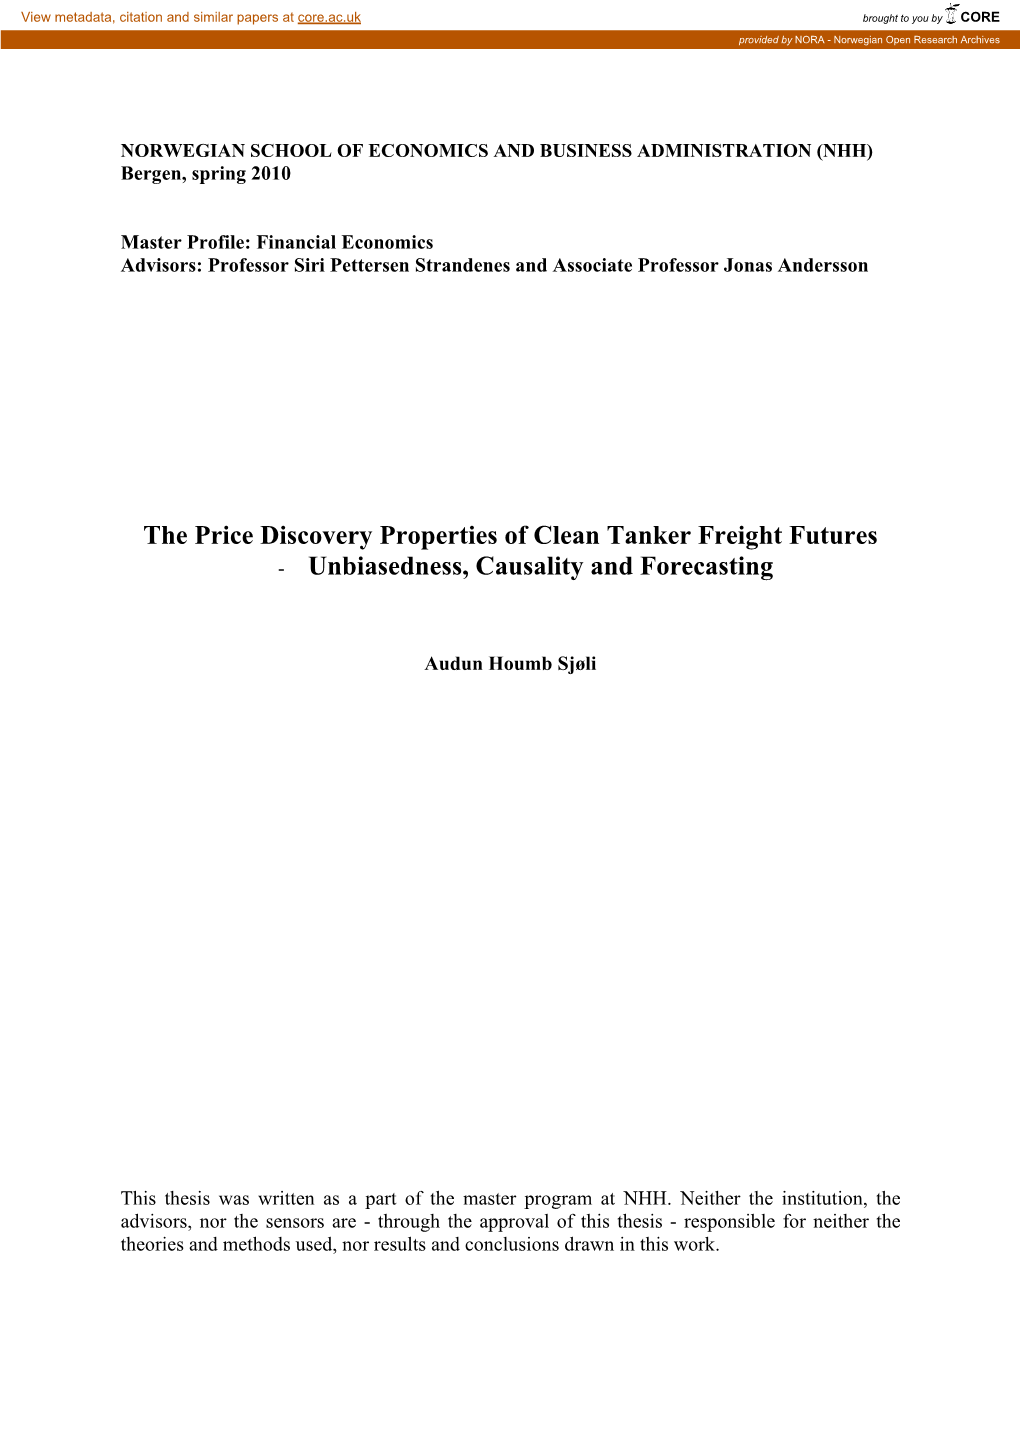 The Price Discovery Properties of Clean Tanker Freight Futures - Unbiasedness, Causality and Forecasting